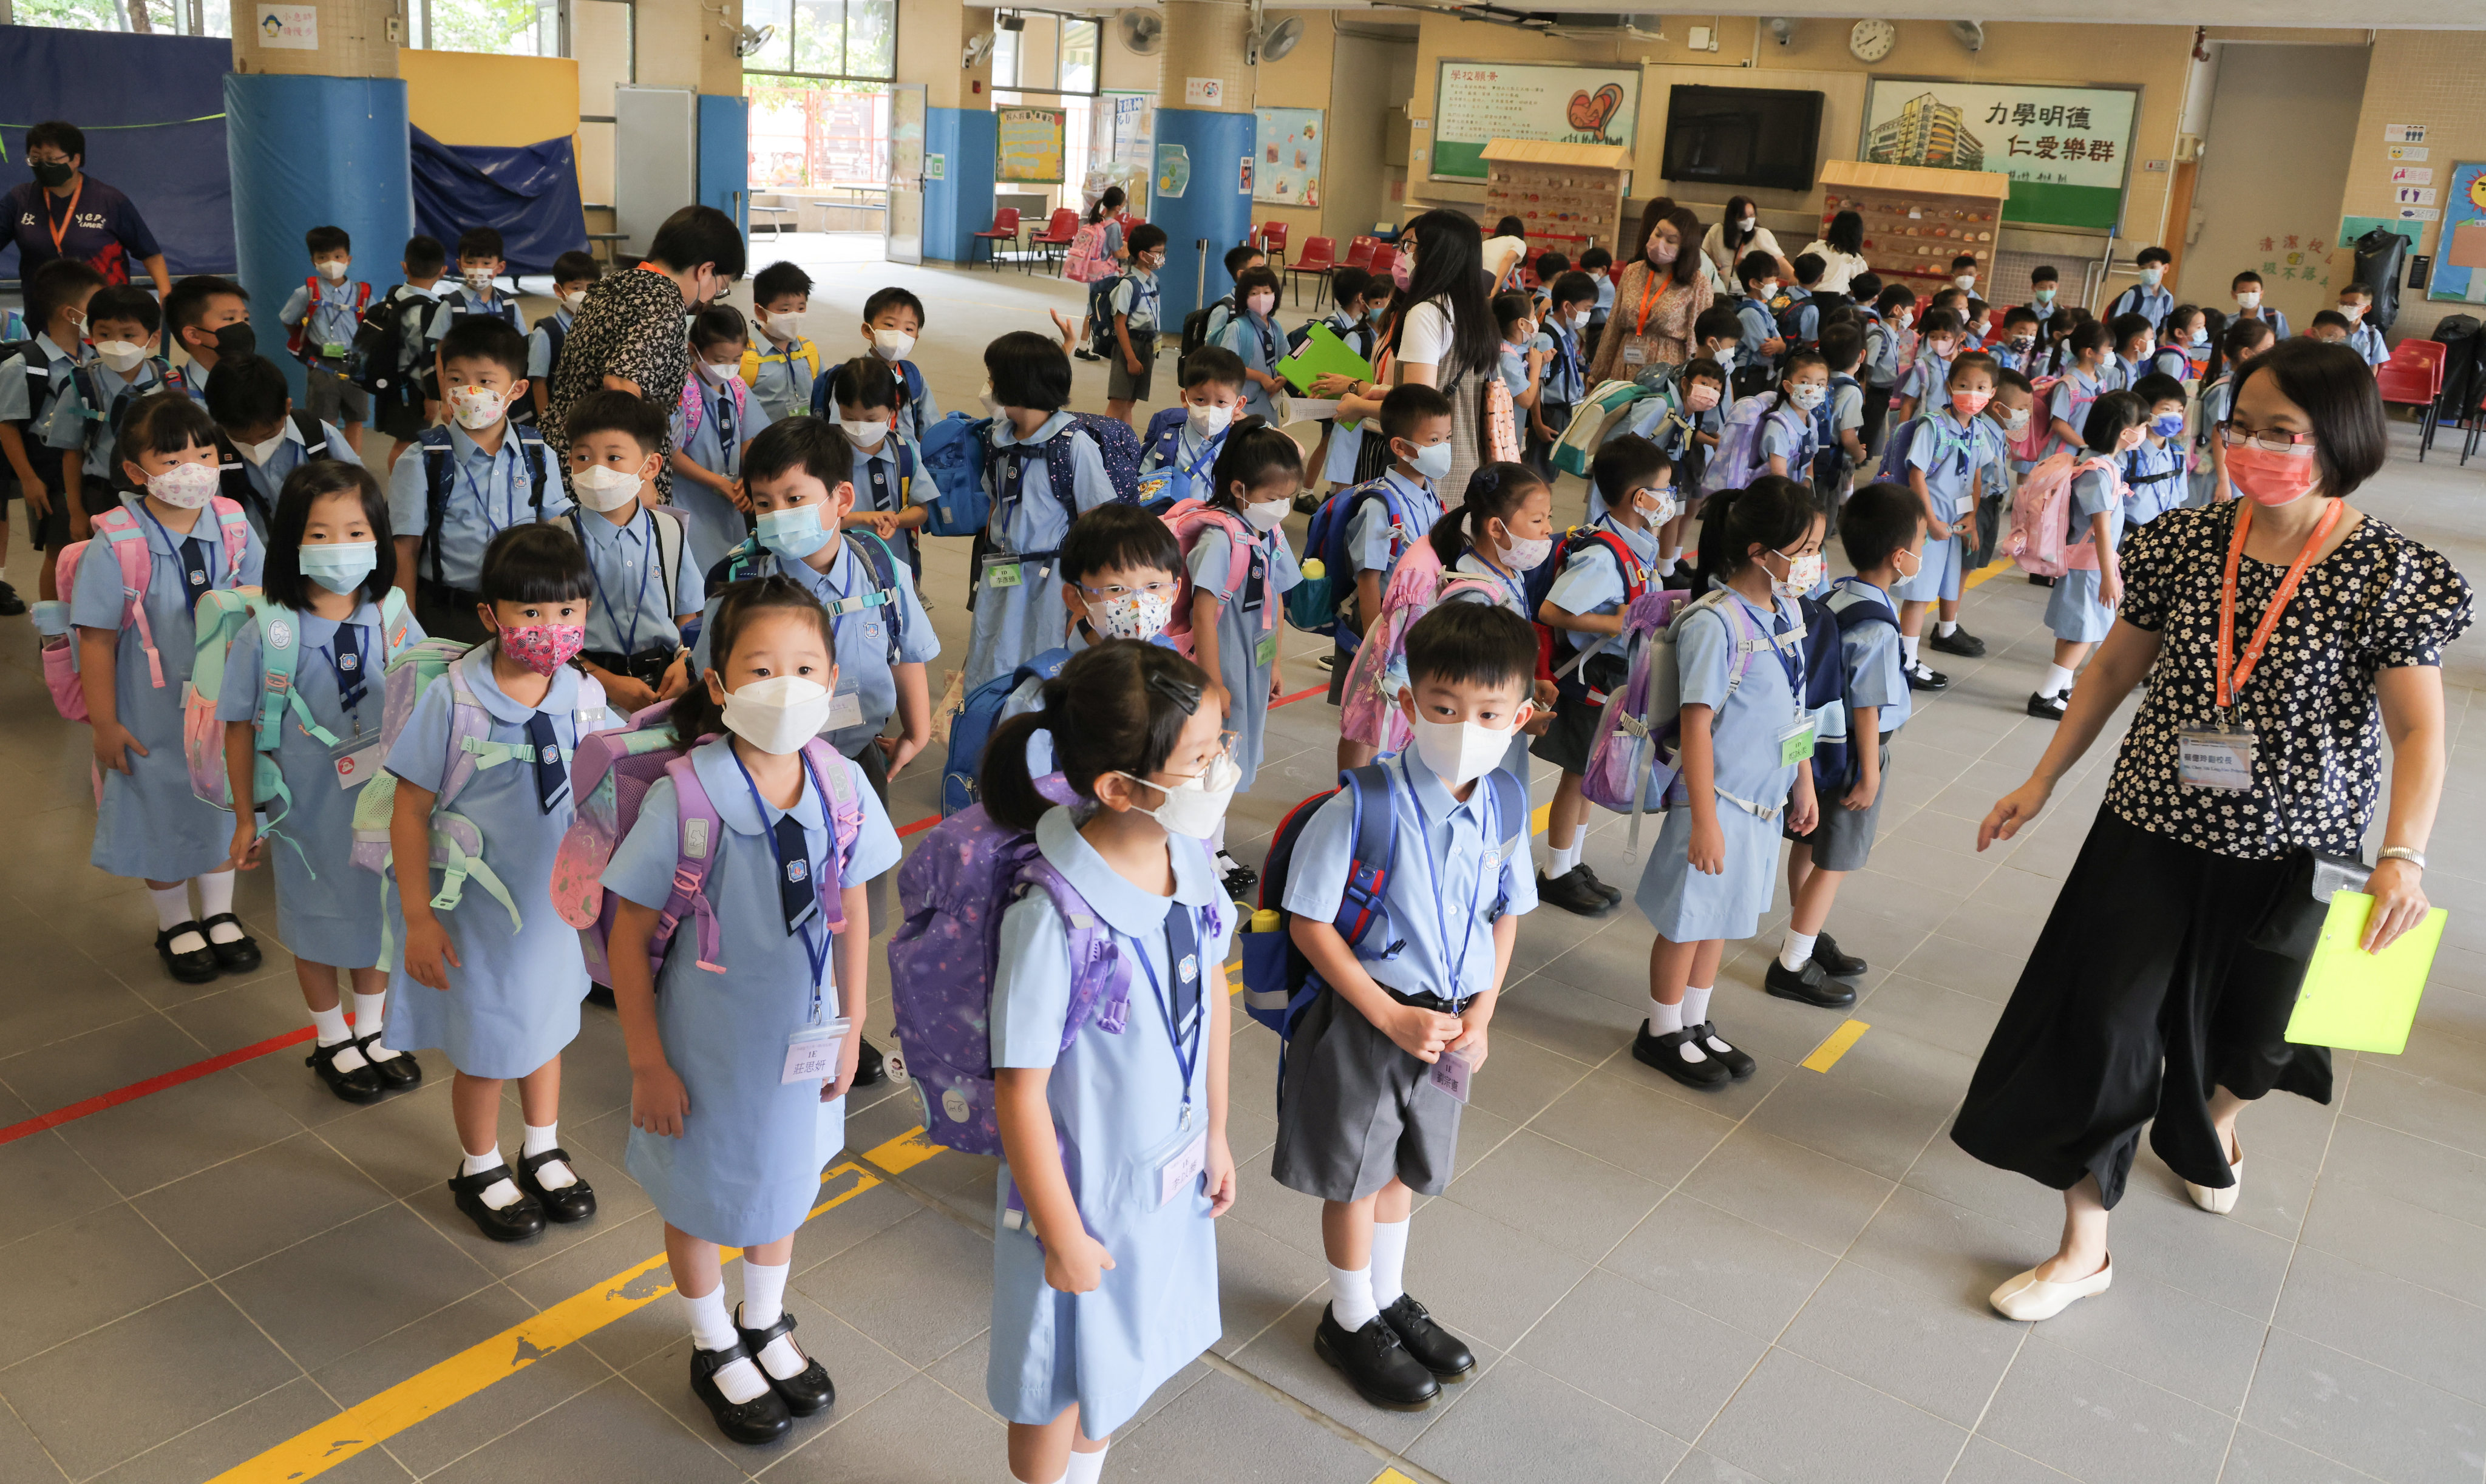 More than 90 per cent of students in Hong Kong secured a spot at one of their top three choices for public primary school this year. Photo: Jelly Tse